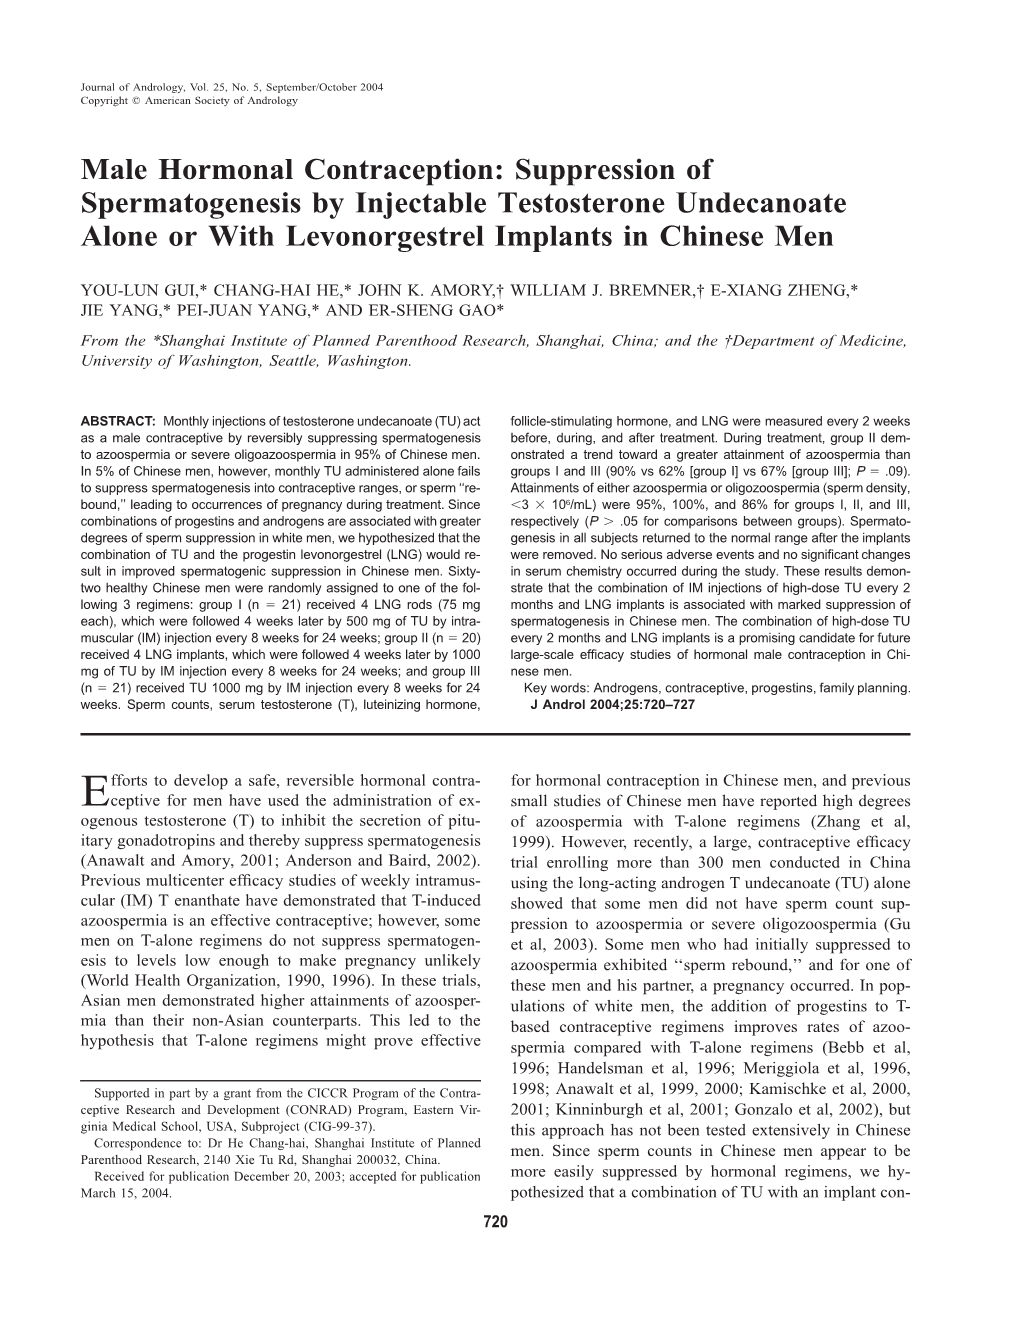 Male Hormonal Contraception: Suppression of Spermatogenesis by Injectable Testosterone Undecanoate Alone Or with Levonorgestrel Implants in Chinese Men